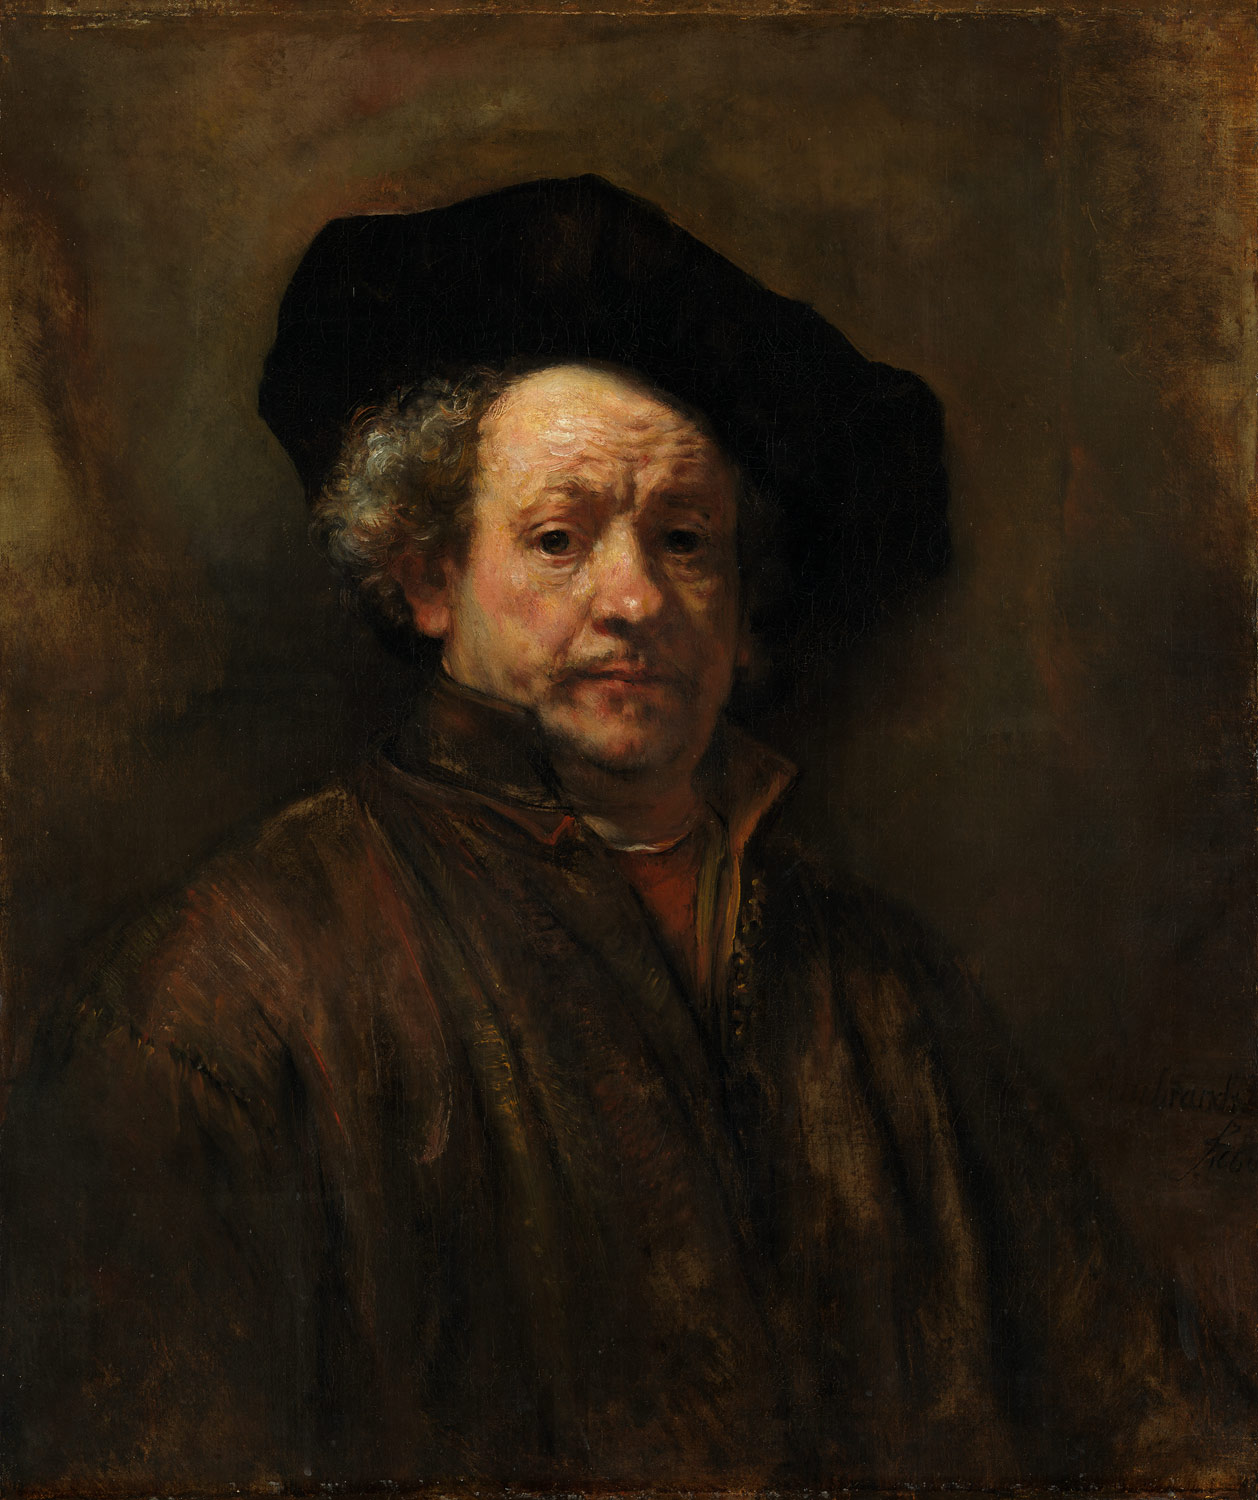 Painting of Rembrandt